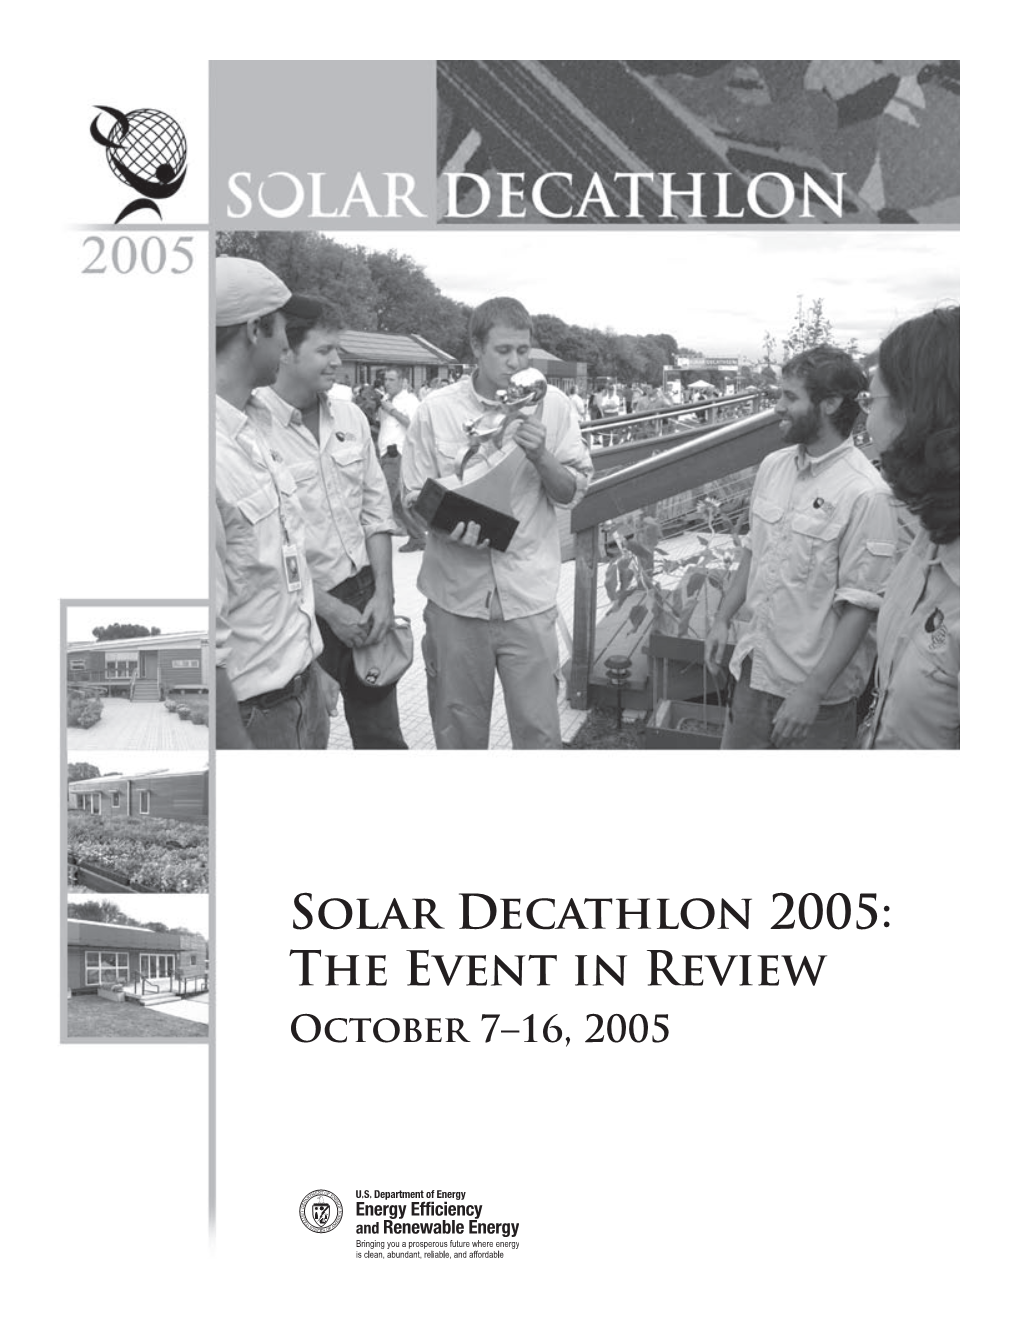 Solar Decathlon 2005: the Event in Review